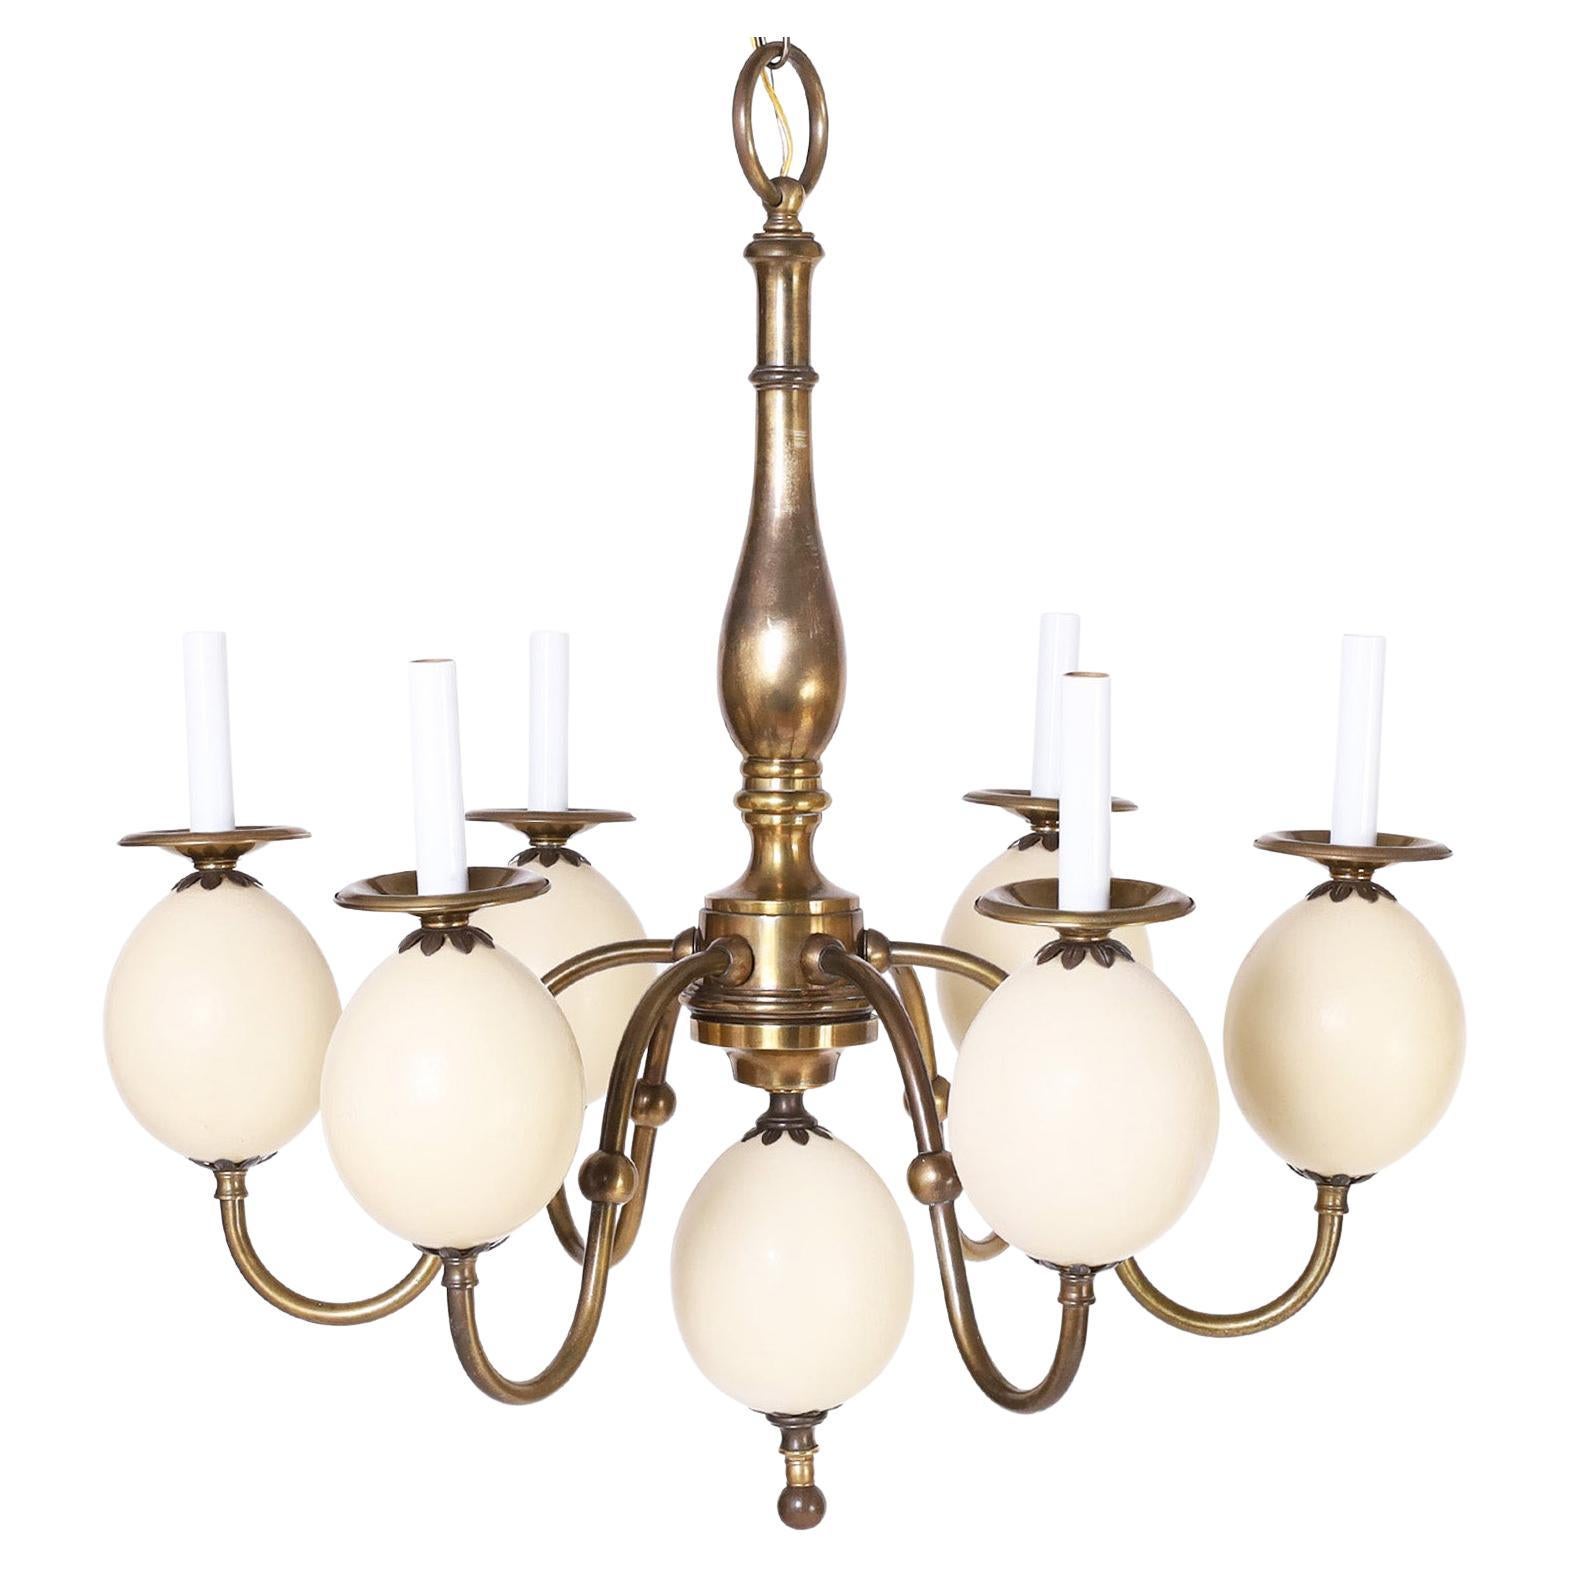 Brass and Faux Ostrich Egg Chandelier For Sale